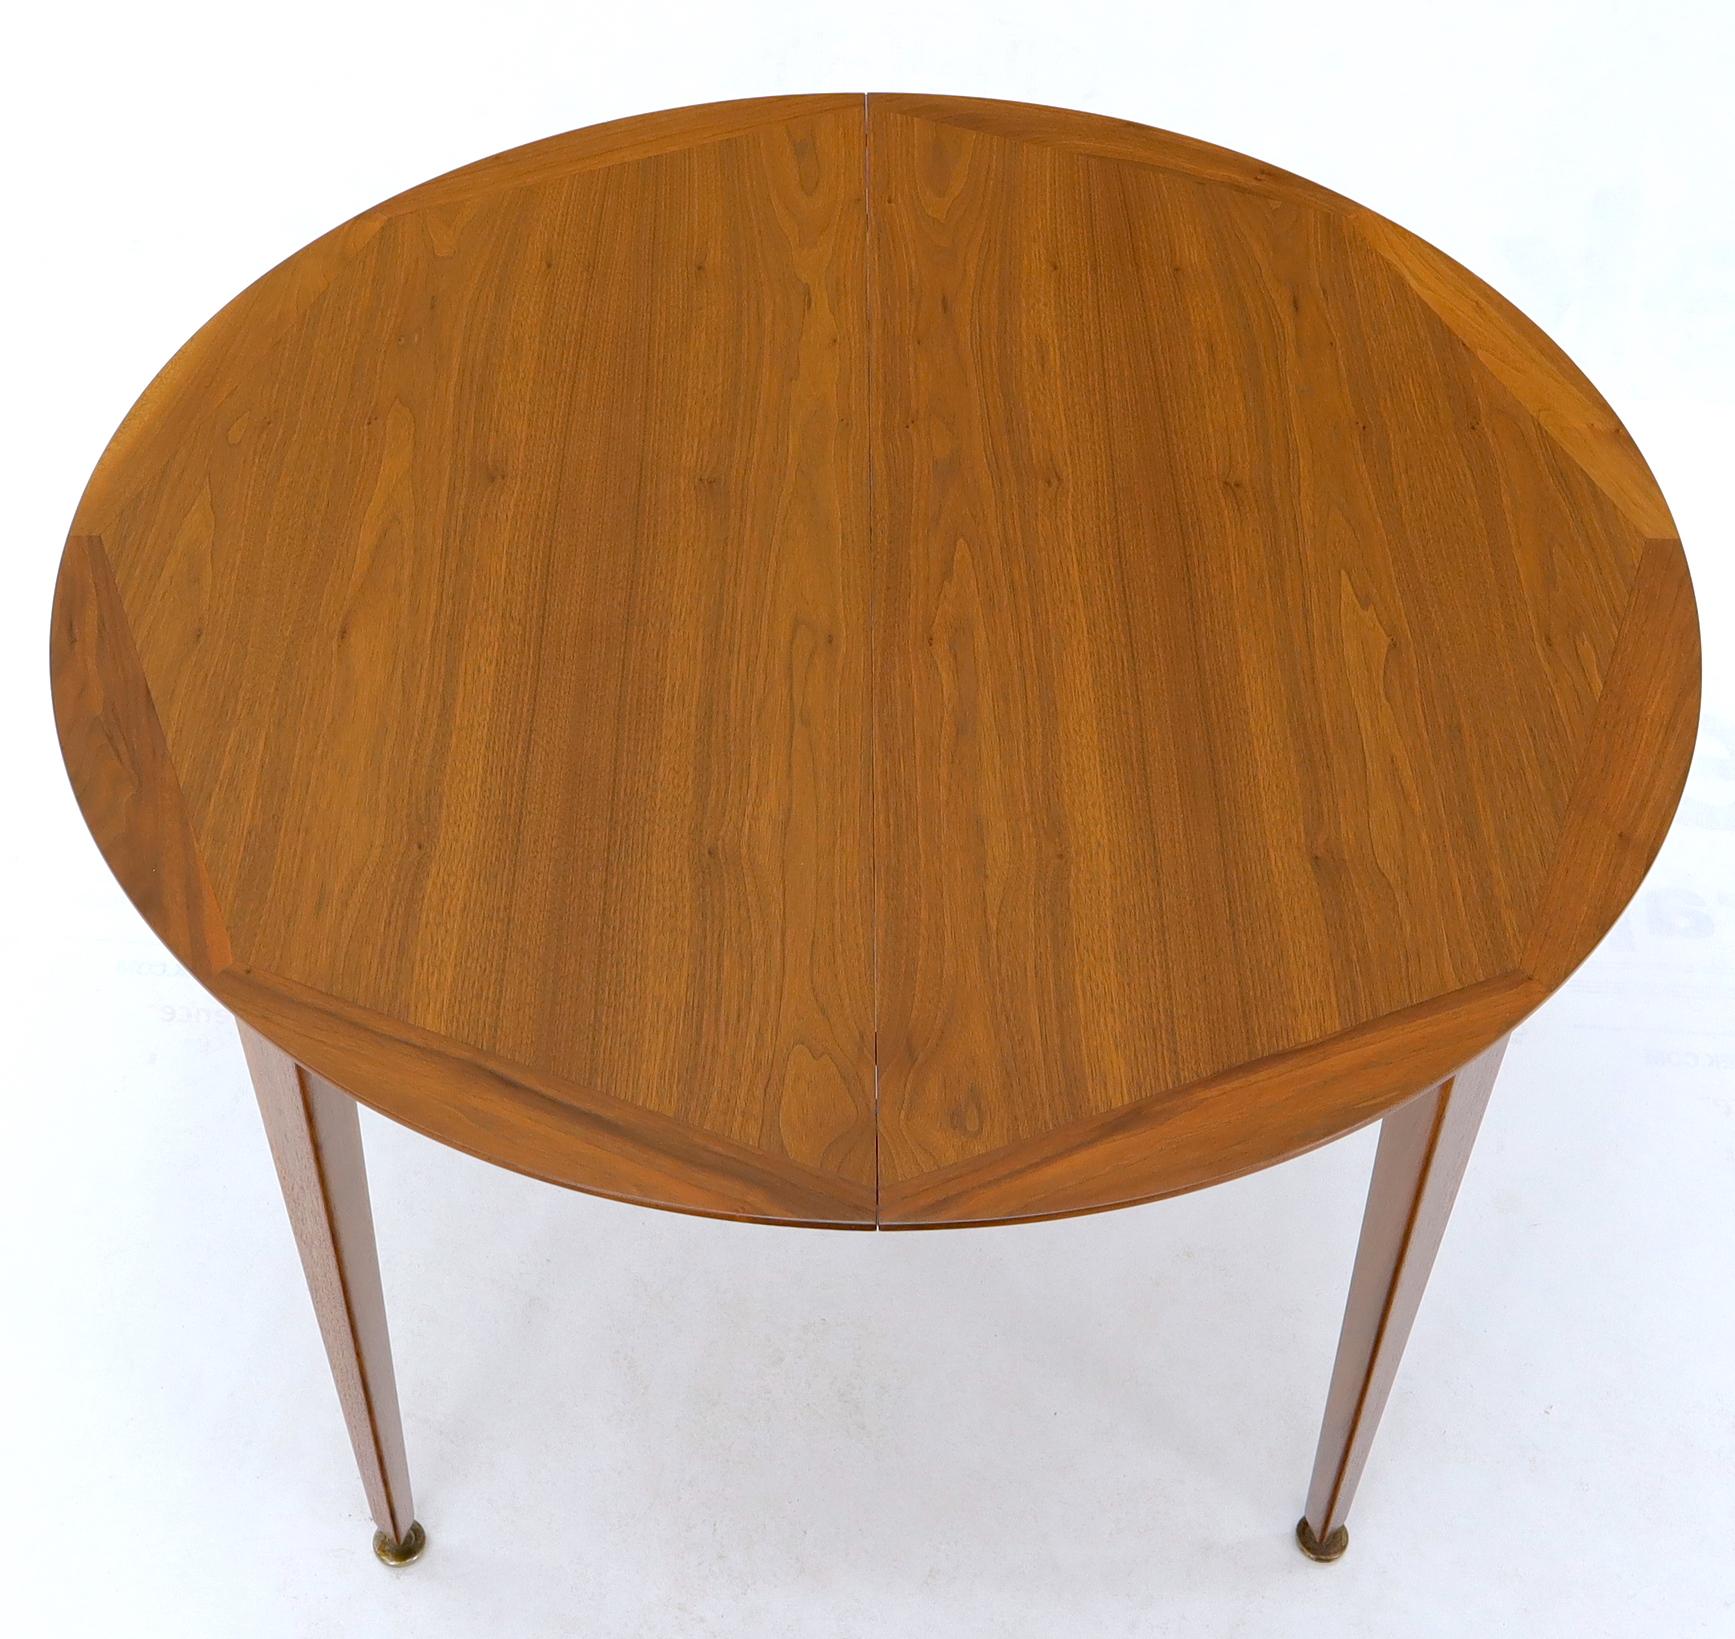 American Round Walnut Tapered Legs Dining Room Table with Two Extensions Boards For Sale